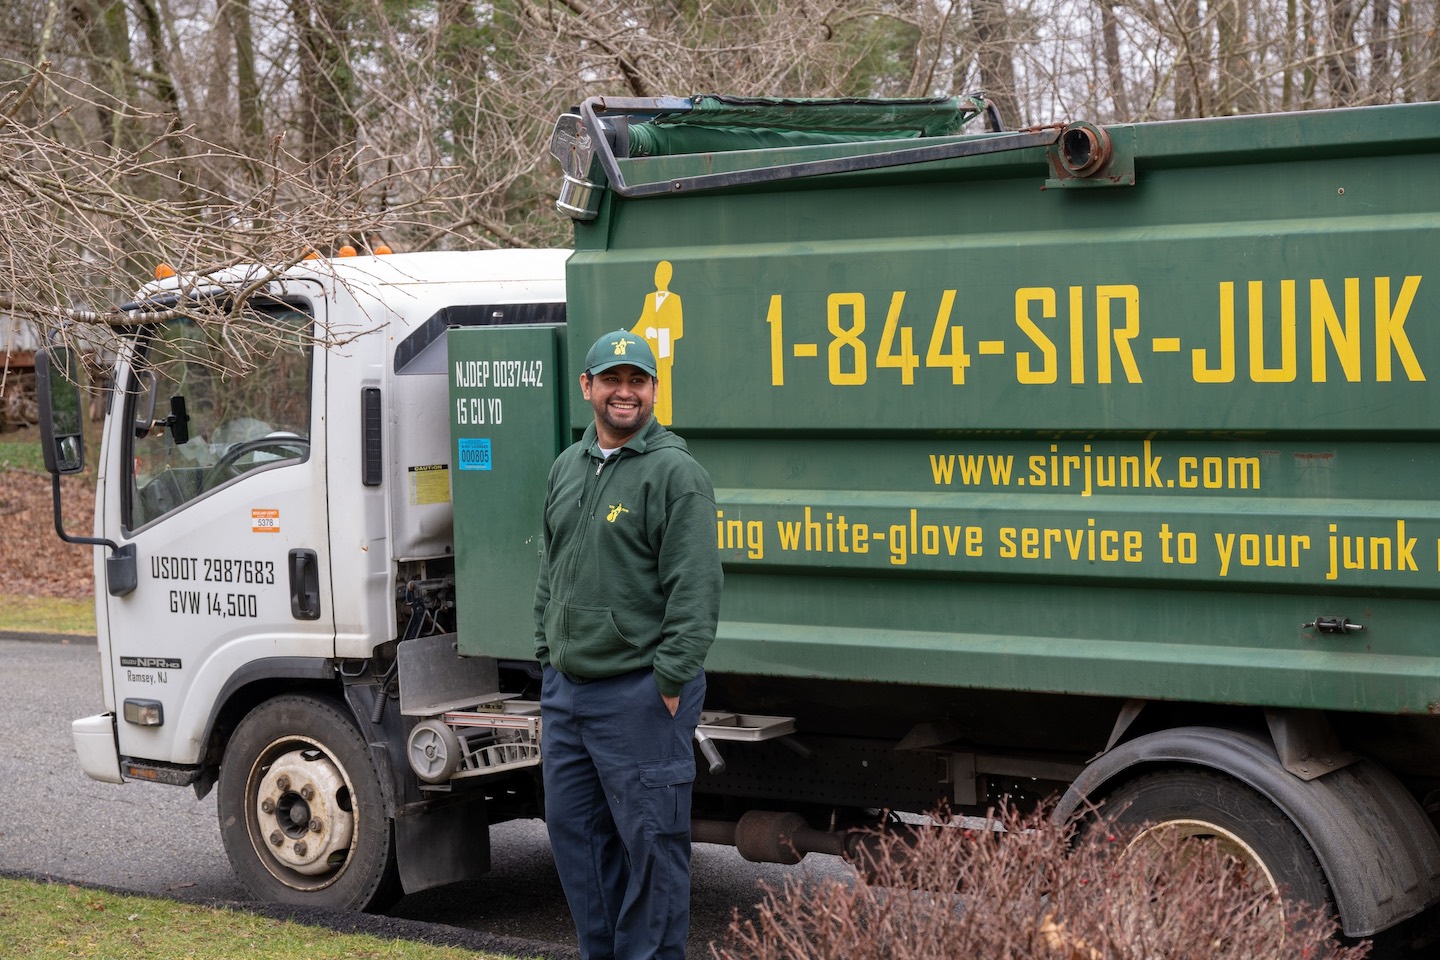 SIR JUNK employee standing by the truck